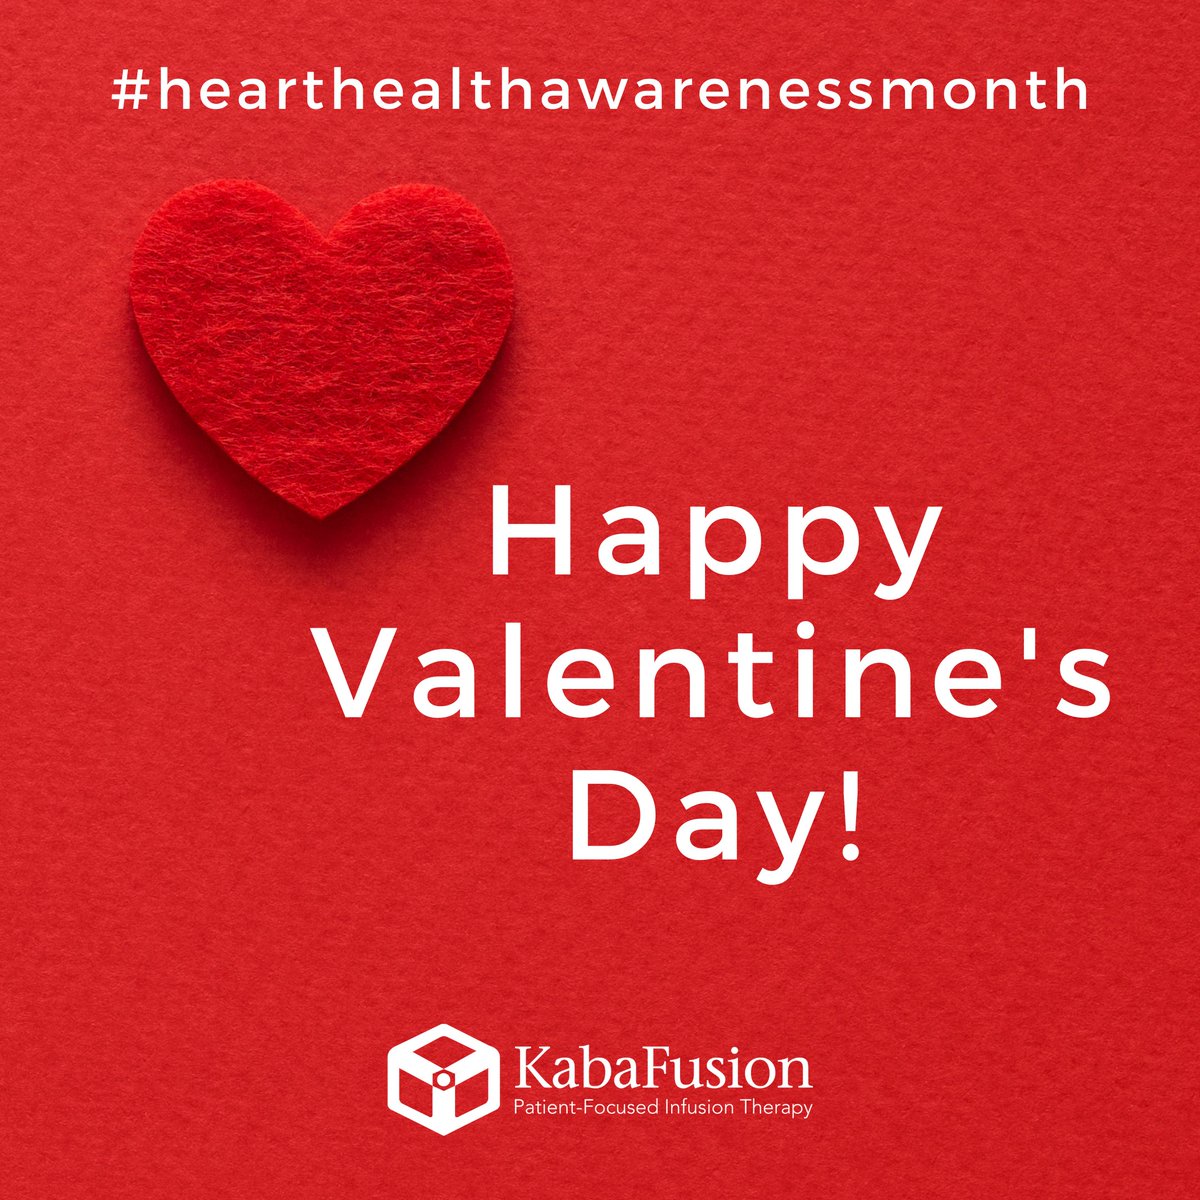 On this Valentine's Day let's celebrate love for one another as well as love for oneself. February is American Heart Health month, and it is an important reminder to stay heart healthy and practice self-care. Happy Valentine's Day! ❤️ #hearthealthawarenessmonth #valentinesday